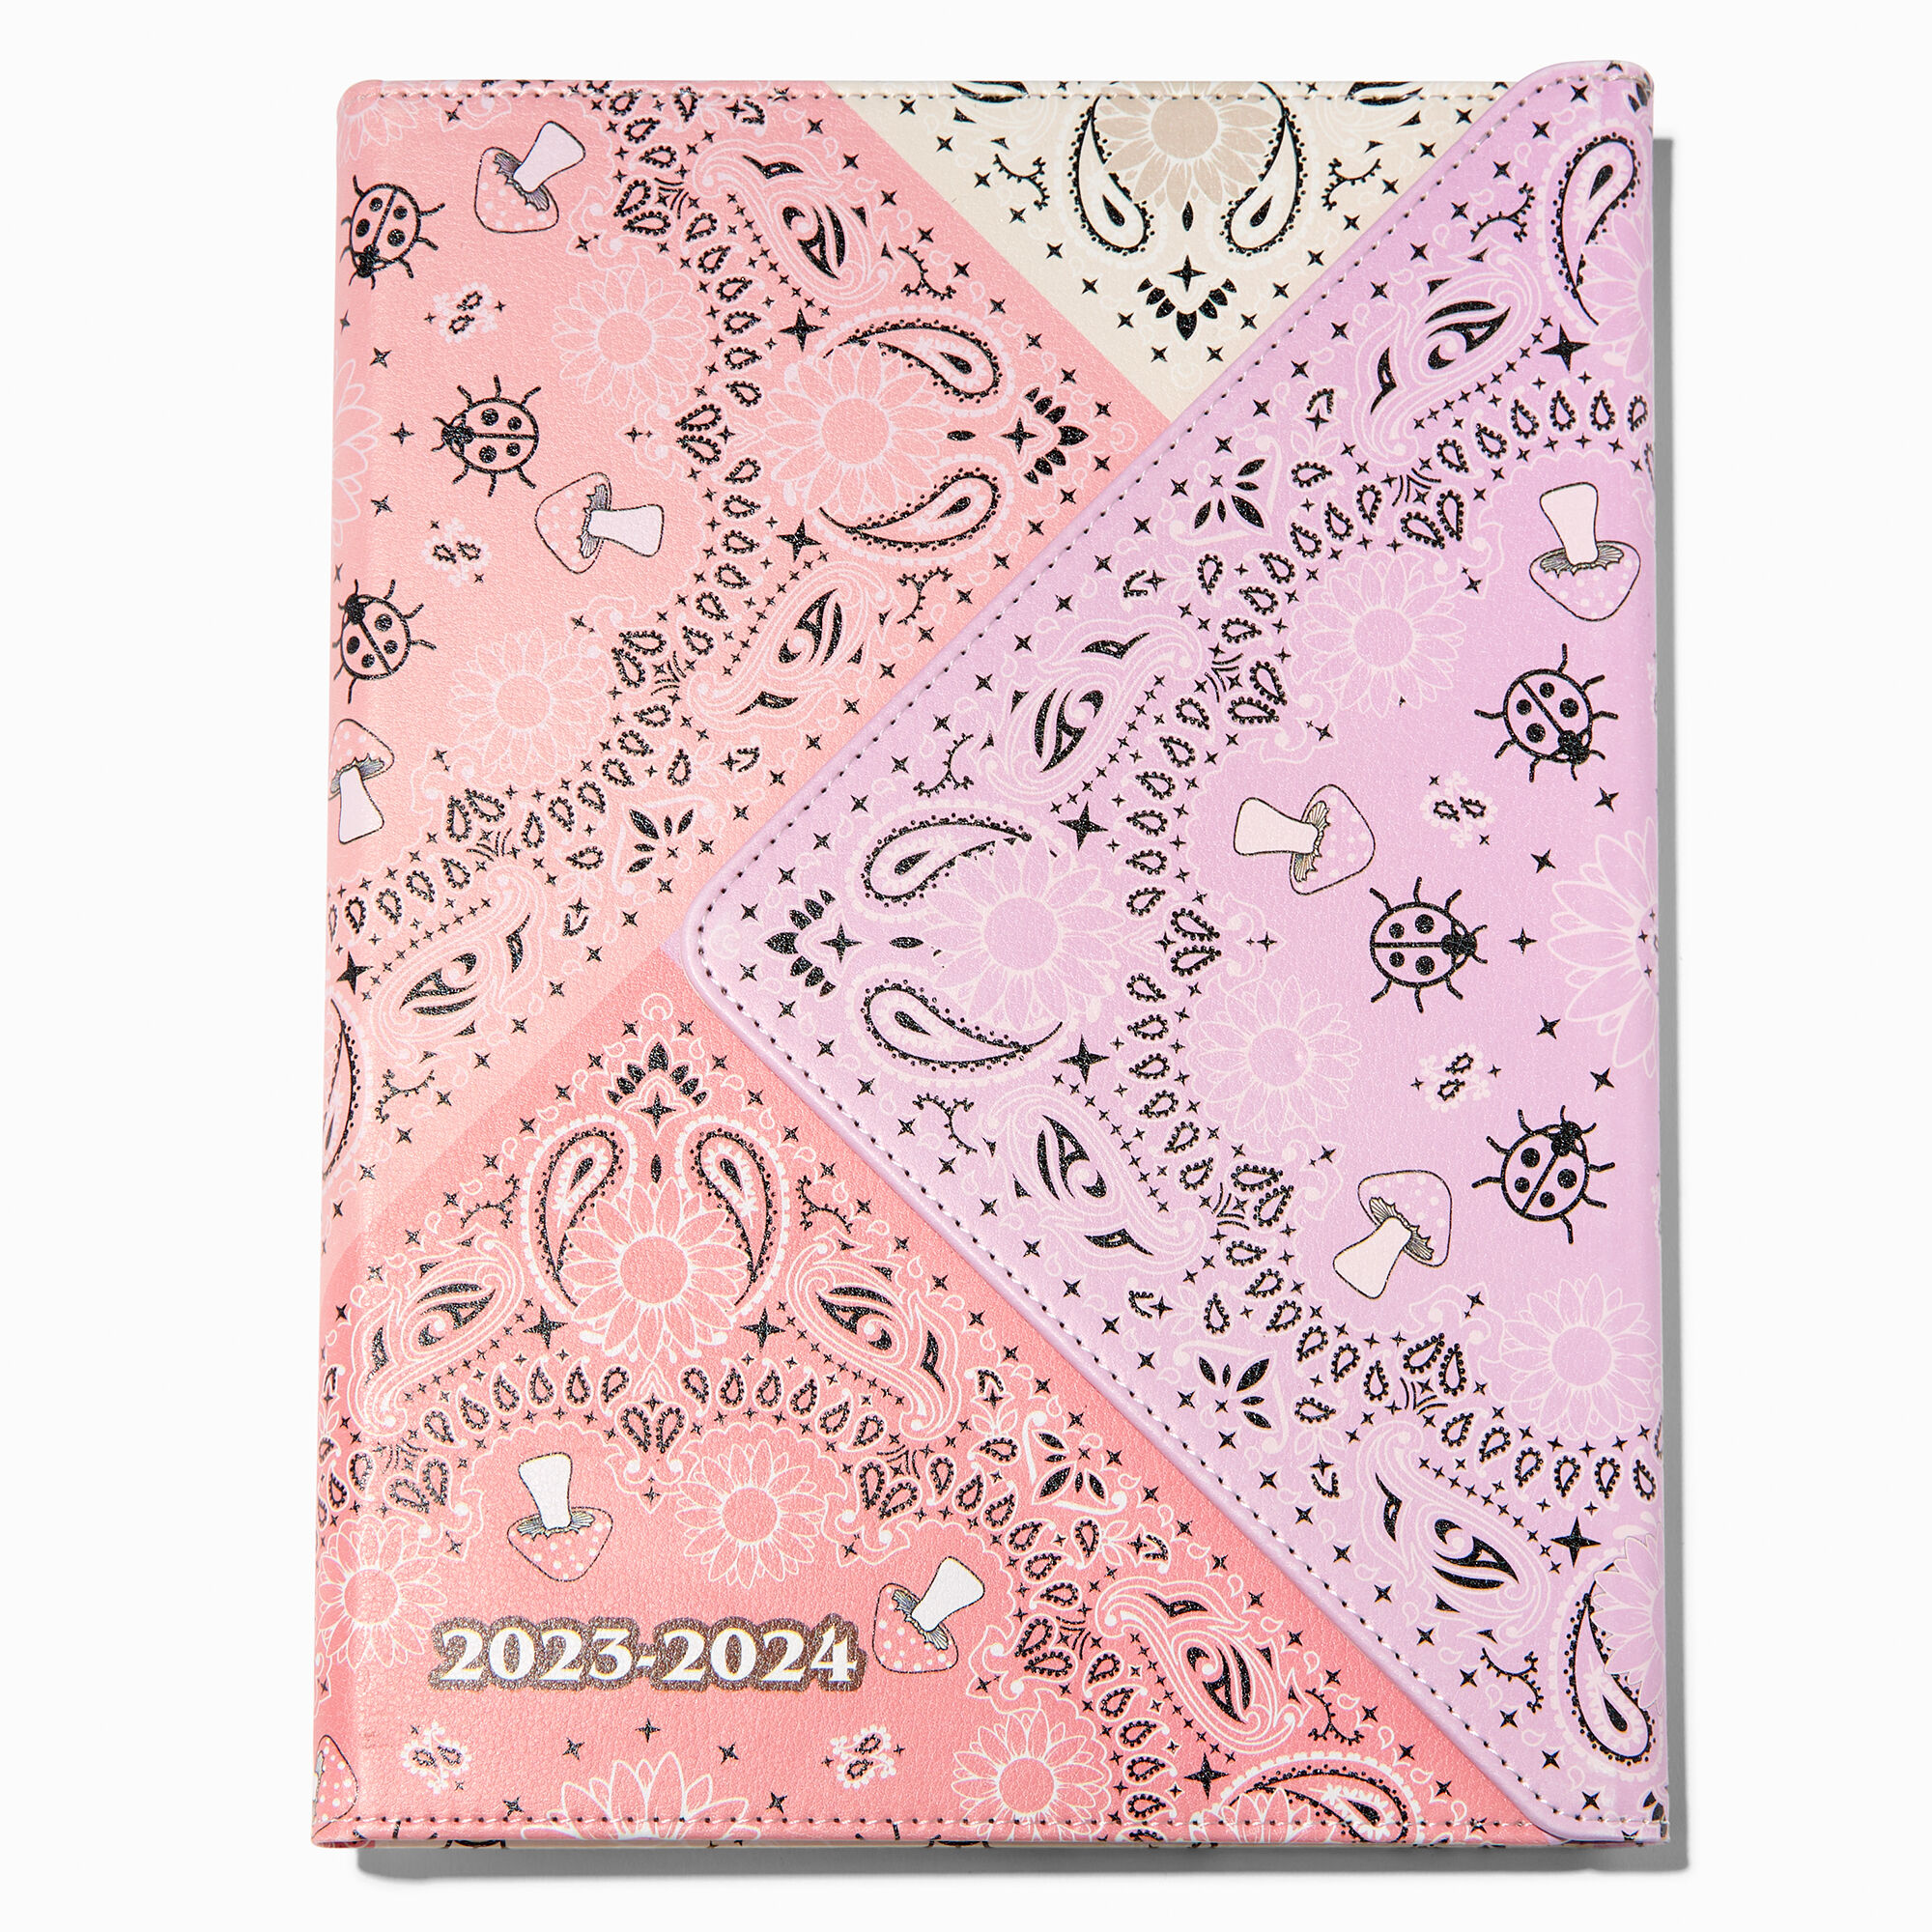 View Claires Bandana Print 202324 Weeklymonthly Planner Pink information